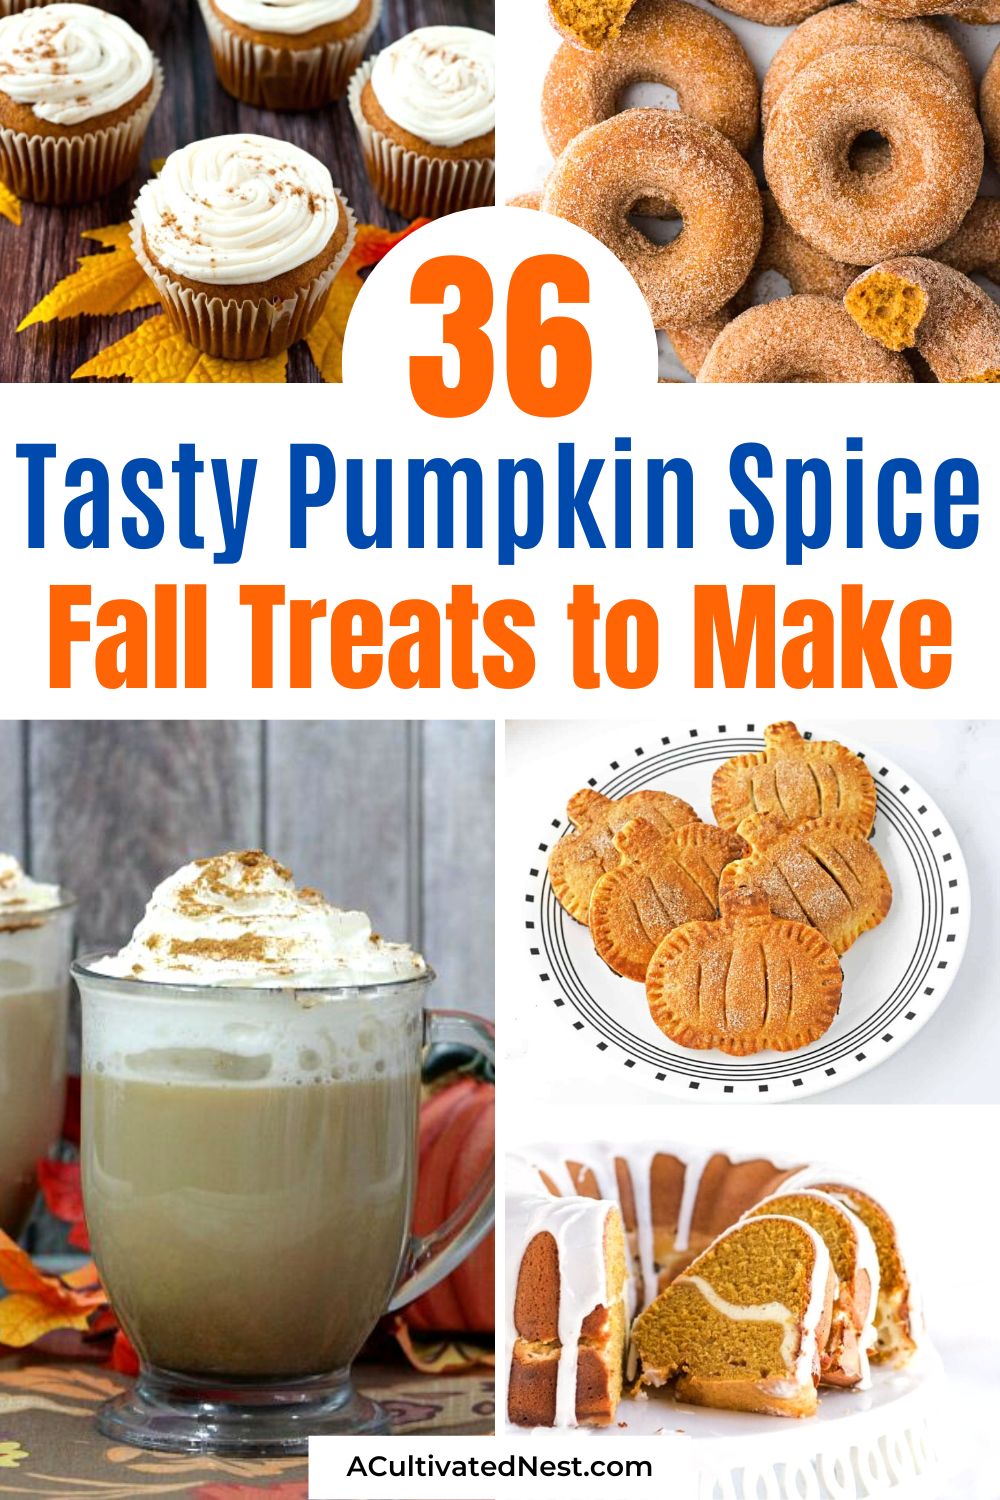 36 Delicious Pumpkin Spice Recipes- Make your kitchen smell like a cozy autumn haven with these pumpkin spice recipes! From delicious pumpkin spice lattes to decadent desserts, we've got your fall cravings covered. Get ready to spice up your life! | #PumpkinSpice #pumpkinSpiceLatte #baking #recipes #ACultivatedNest